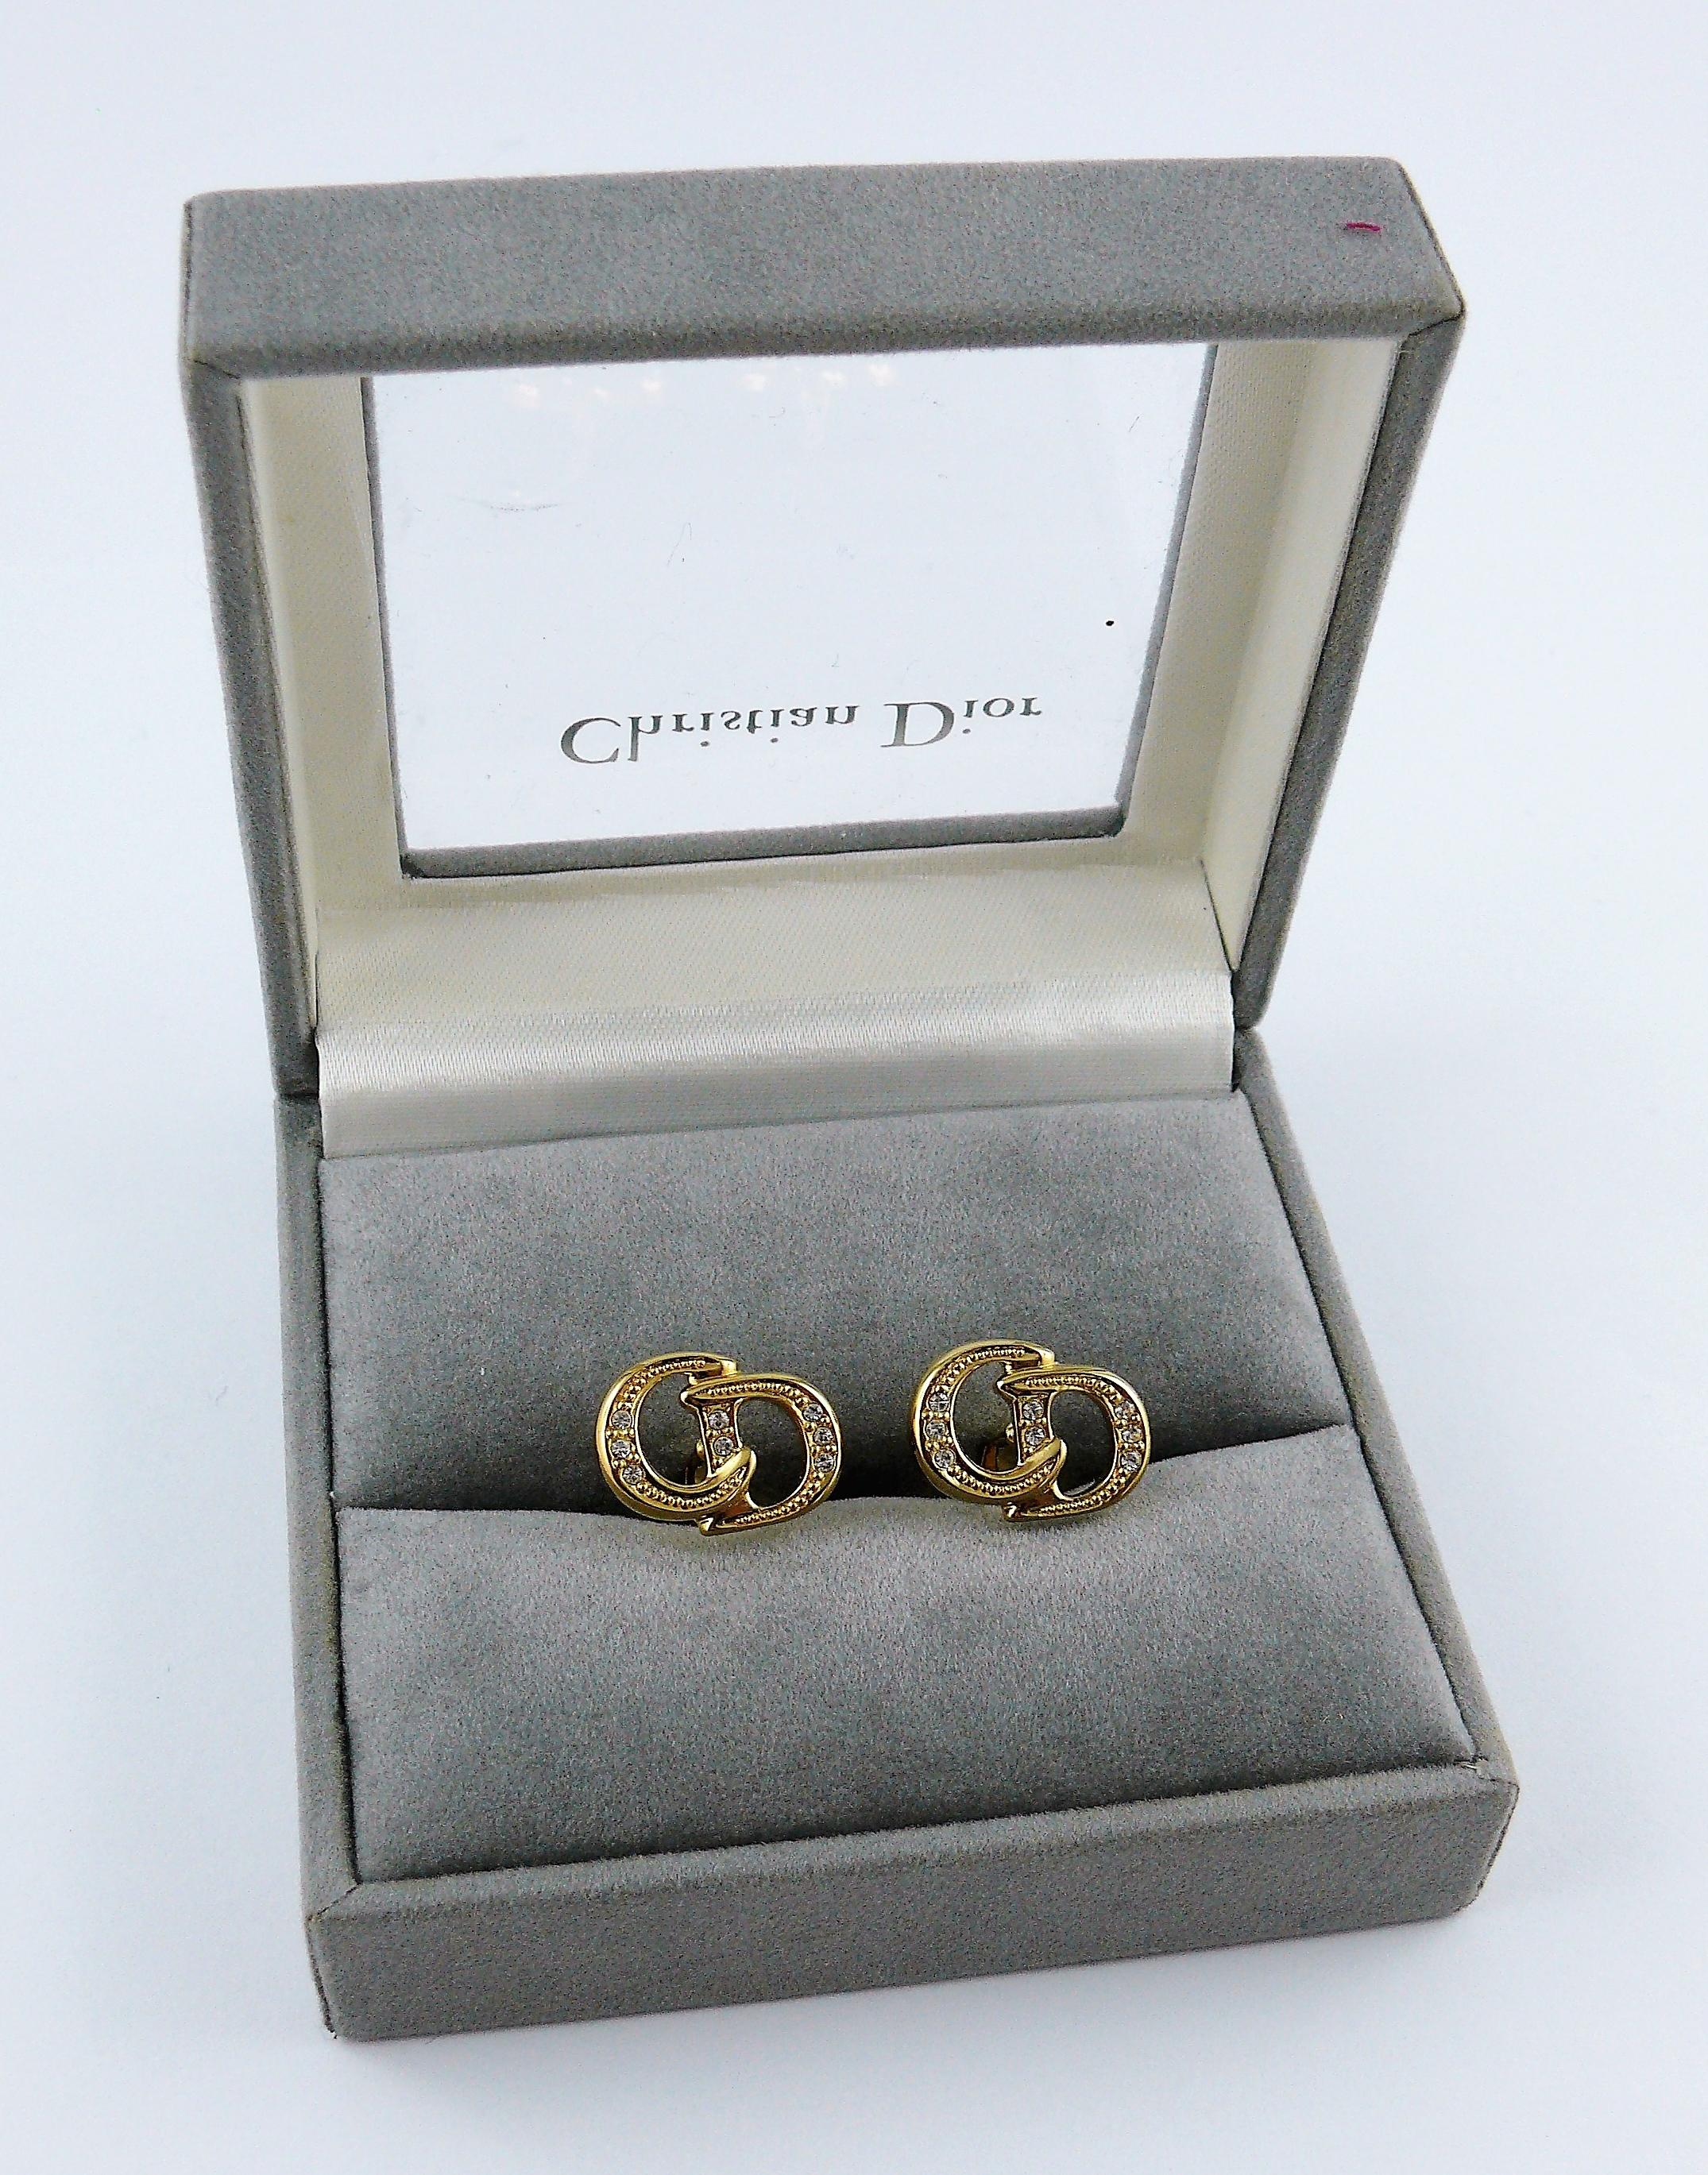 CHRISTIAN DIOR vintage gold toned cuff links featuring CD monogram with clear crystal embellishement.

Embossed CHR DIOR.
GERMANY.

Indicative measurements : length approx. 2 cm (0.79 inch) / CD logo approx. 1.6 cm x 1 cm (0.63 inch x 0.39